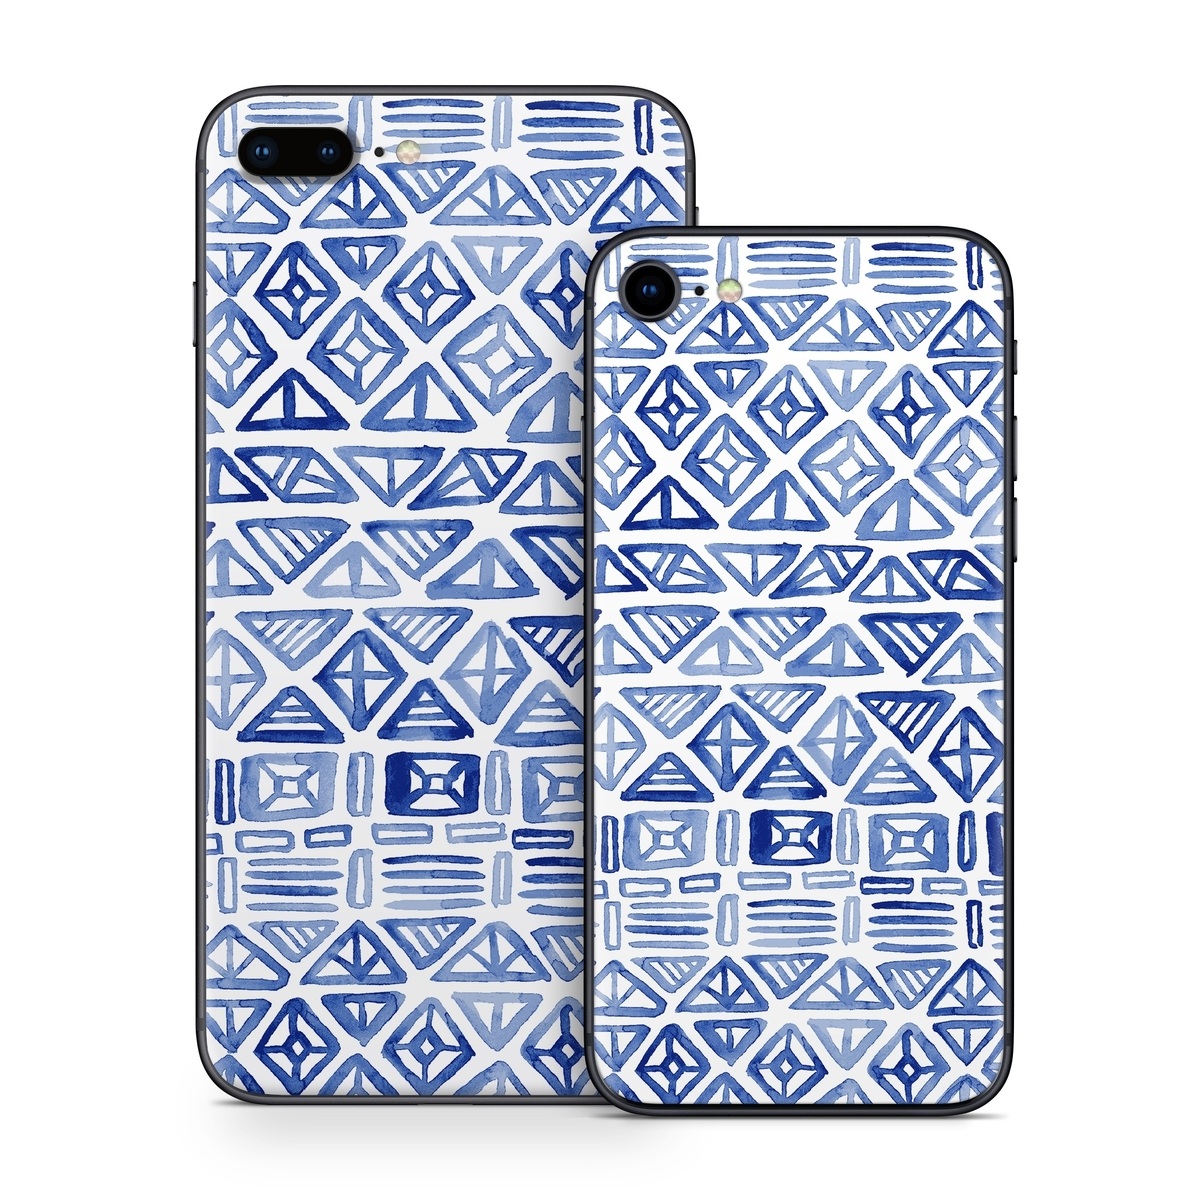 iPhone 8 Series Skin design of Pattern, Line, Design, Symmetry, Visual arts, Parallel, with white, blue colors